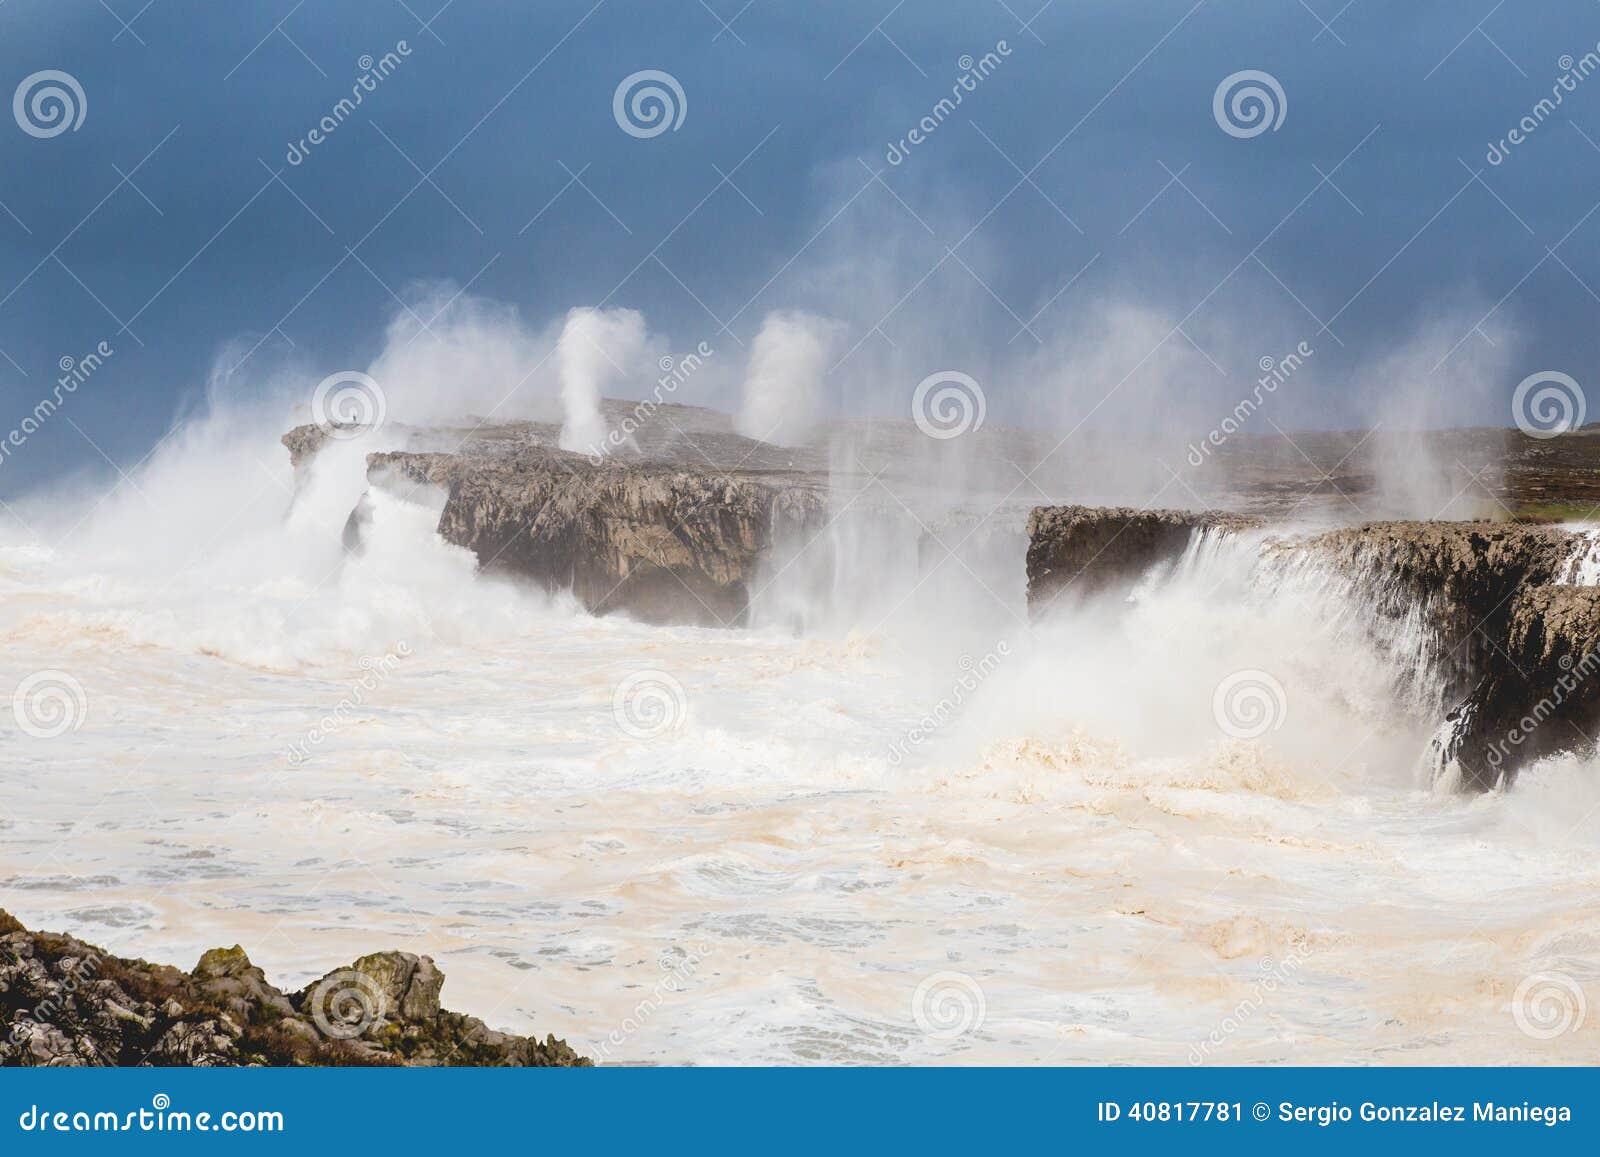 storm on the cliff, bufones